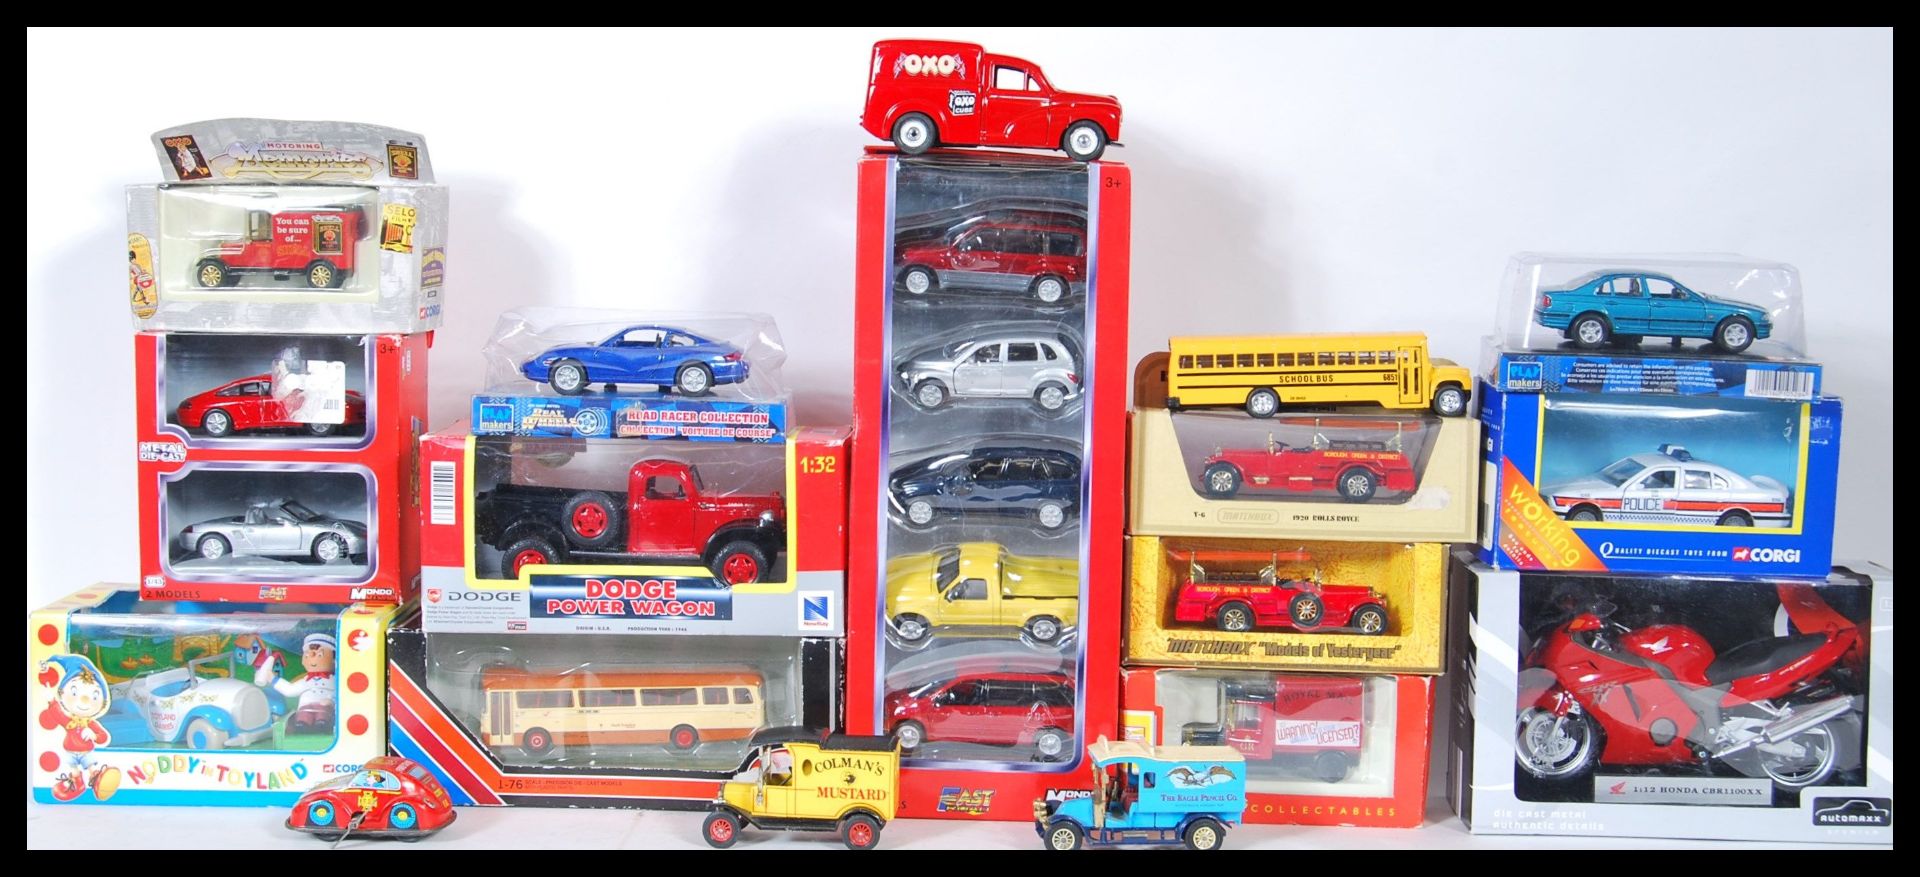 A collection of predominantly boxed scale model diecast cars to include Corgi, Doge power wagon,